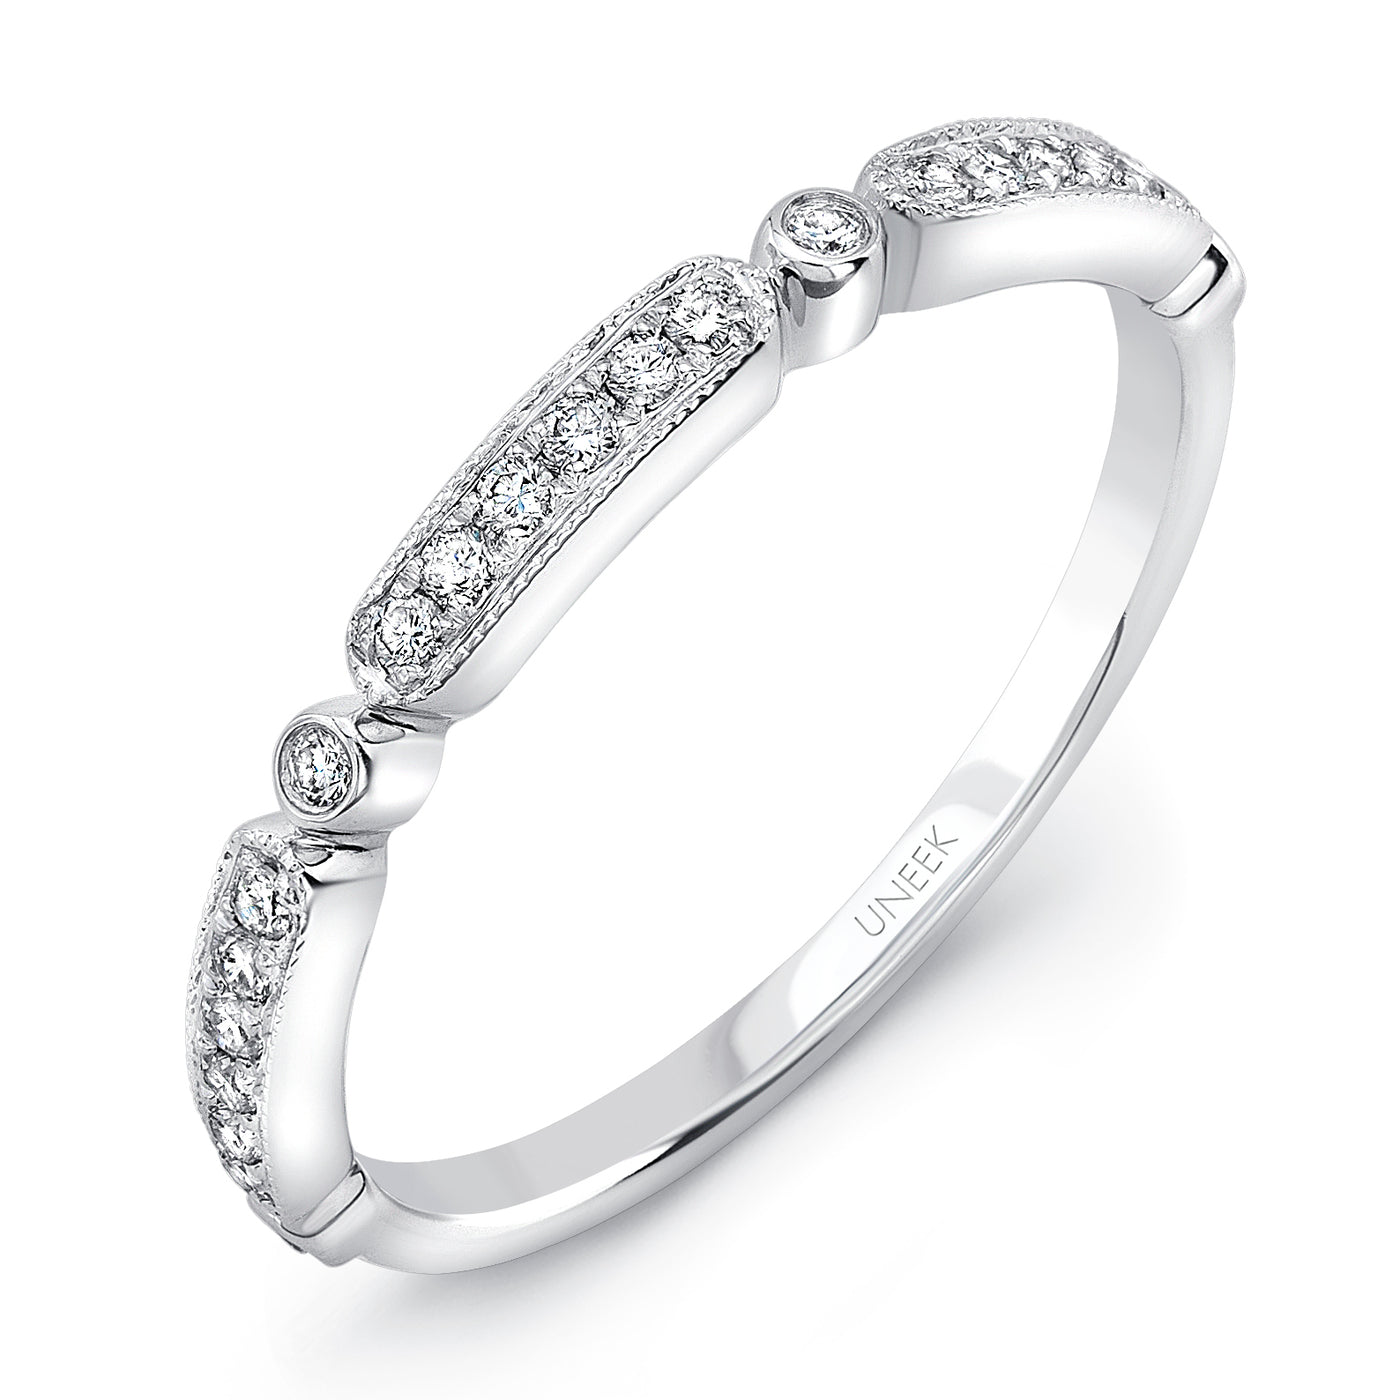 Uneek "Melrose" Stackable Diamond Band in 14K White Gold